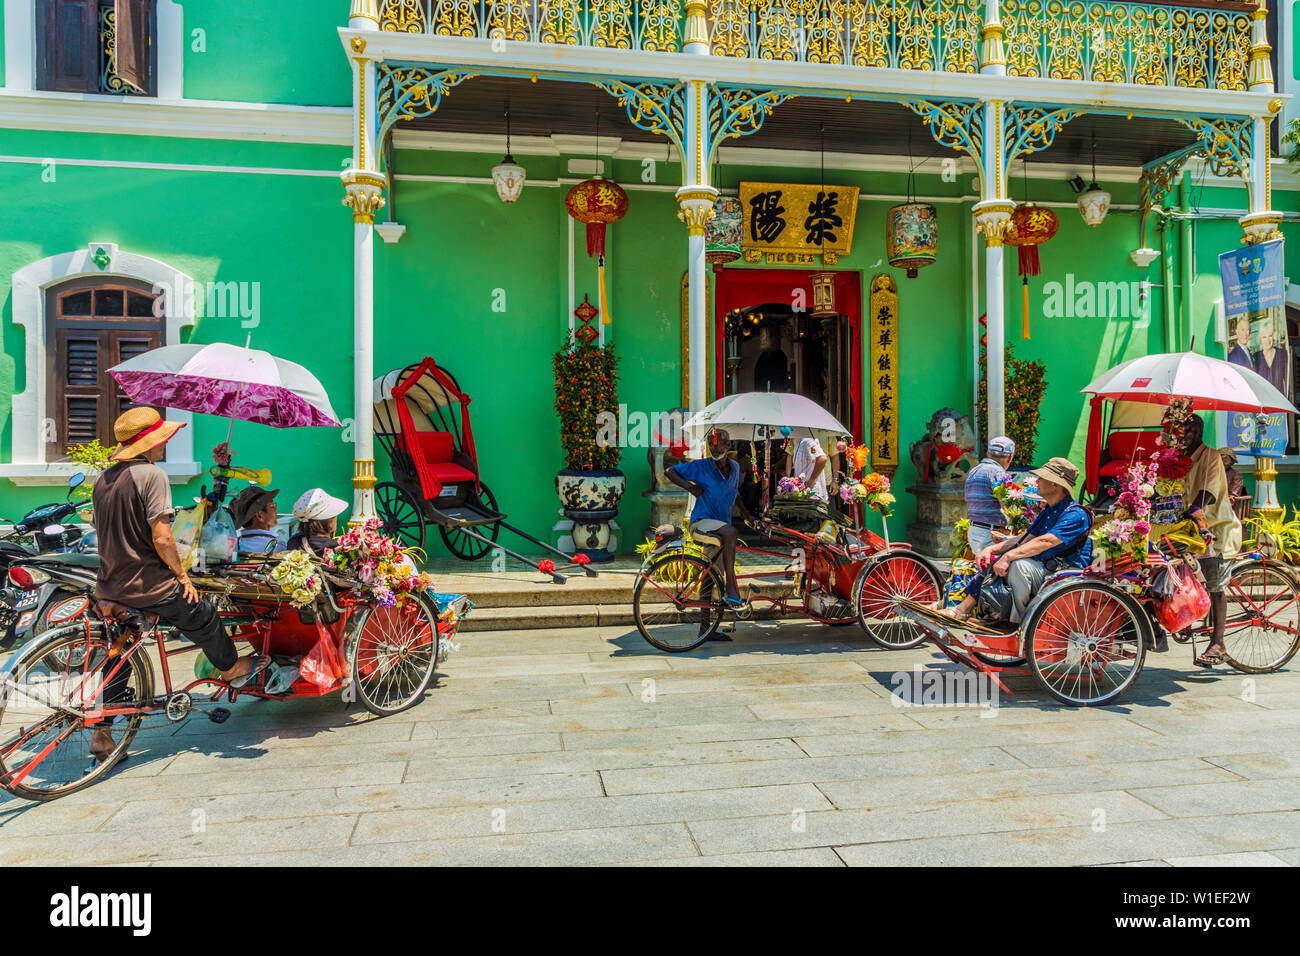 Tourists outside the Pinang Peranakan Mansion, George Town, Penang Island, Malaysia, Southeast Asia, Asia Stock Photo